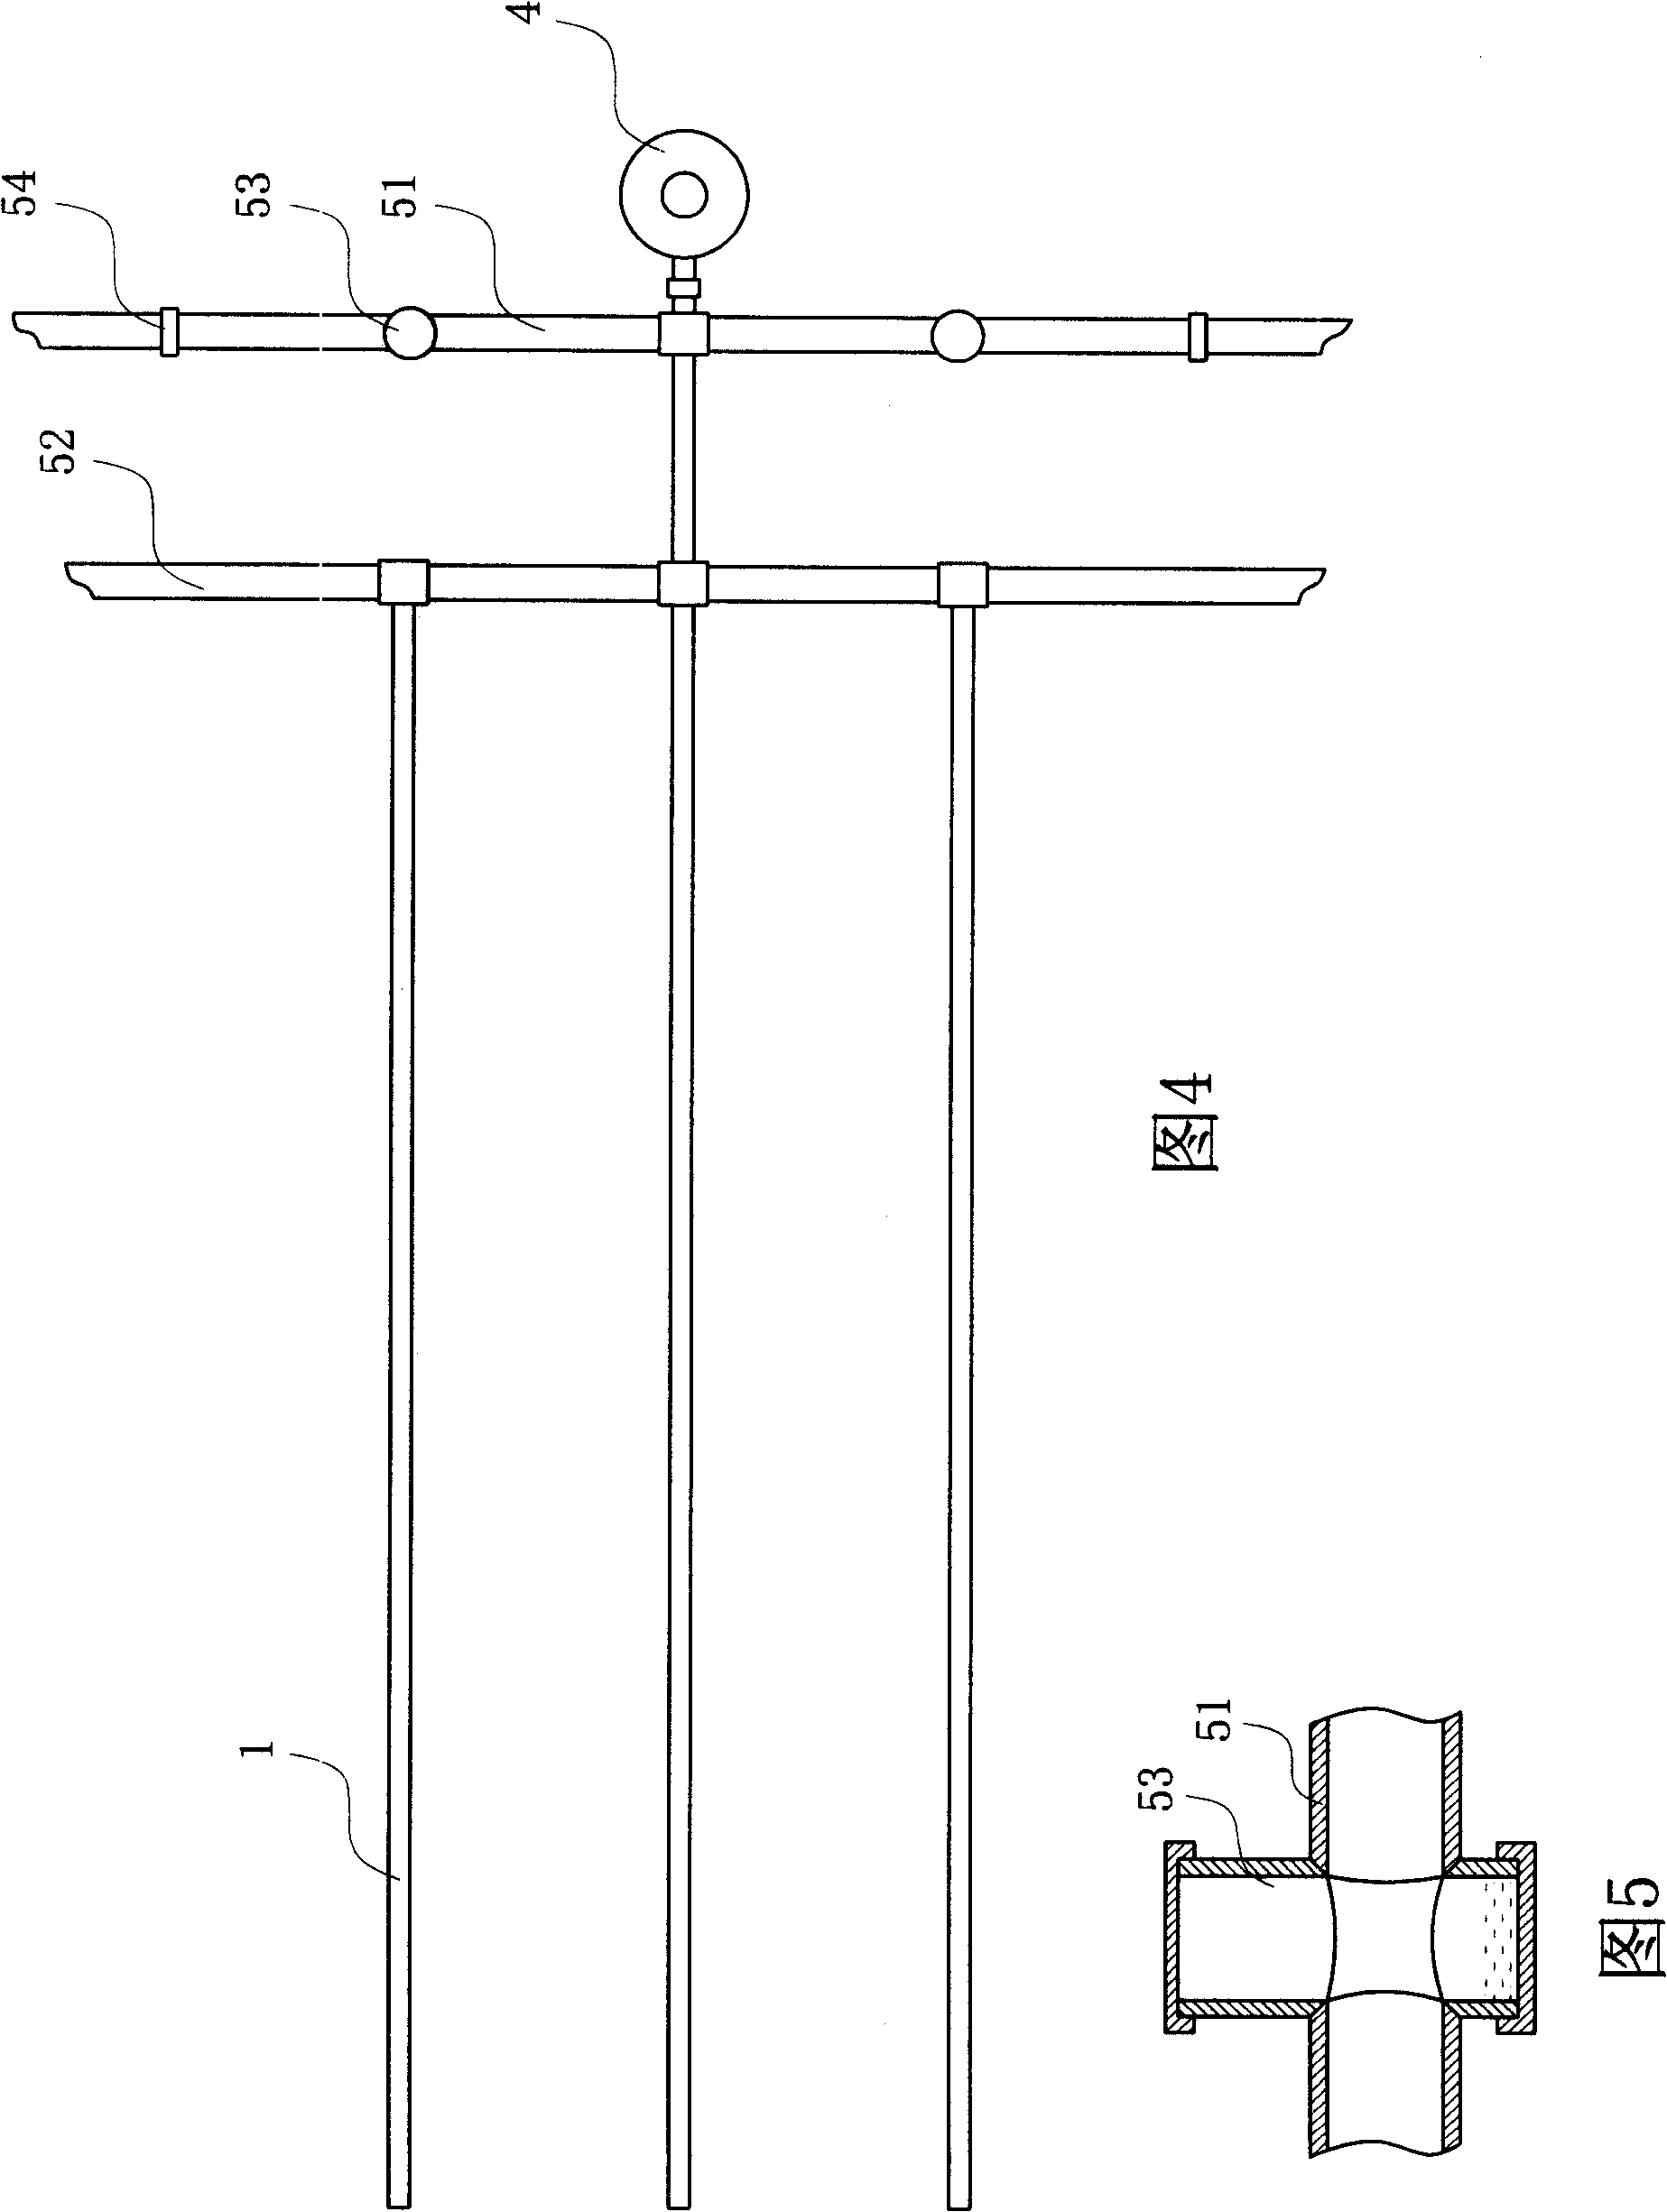 Root irrigation and root irrigation system